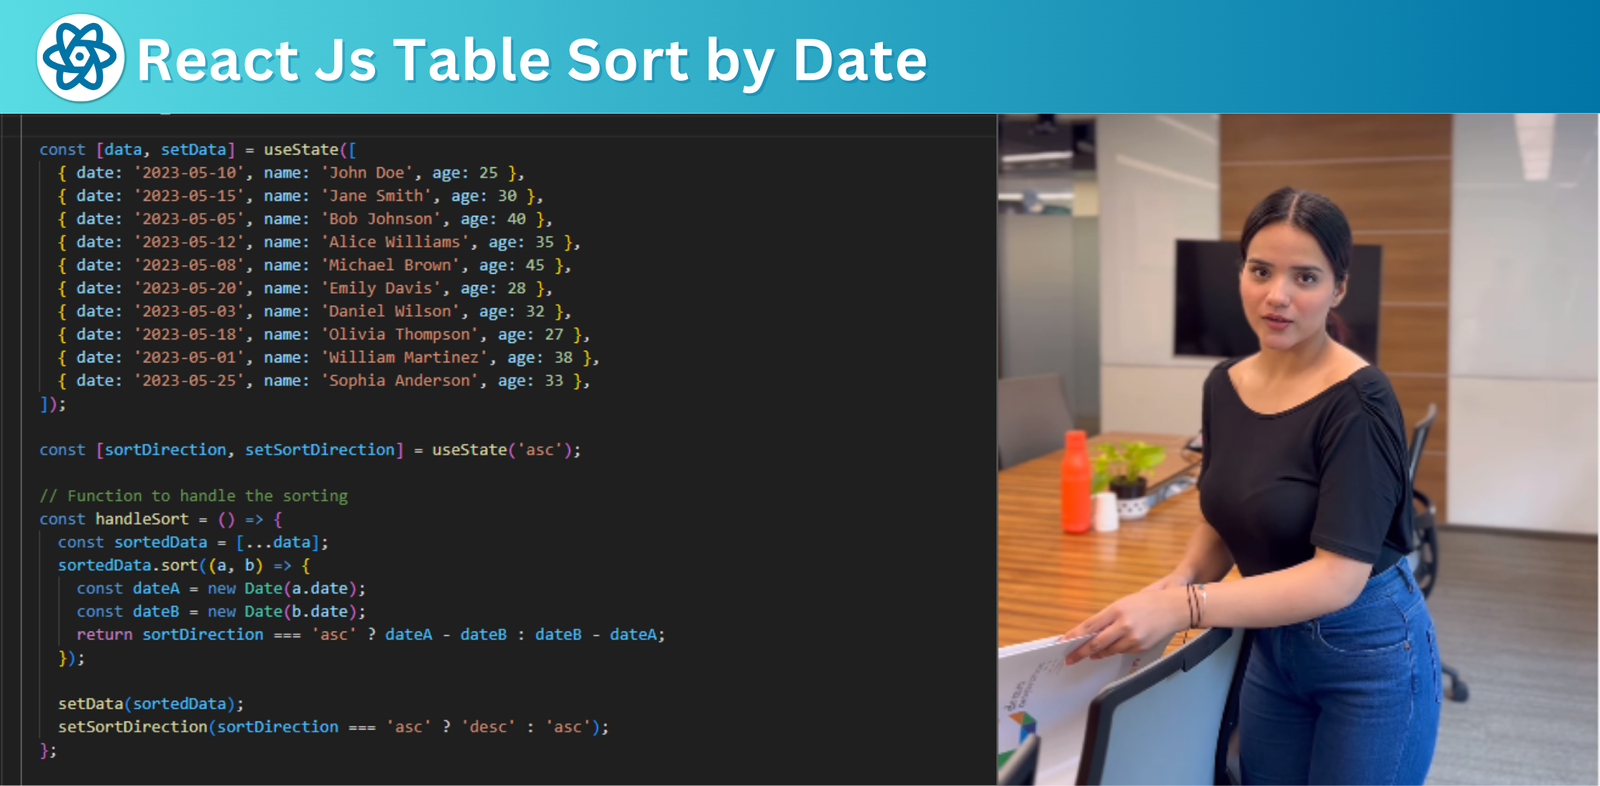 React Sort by Date: How to Sort Tables by Date in React